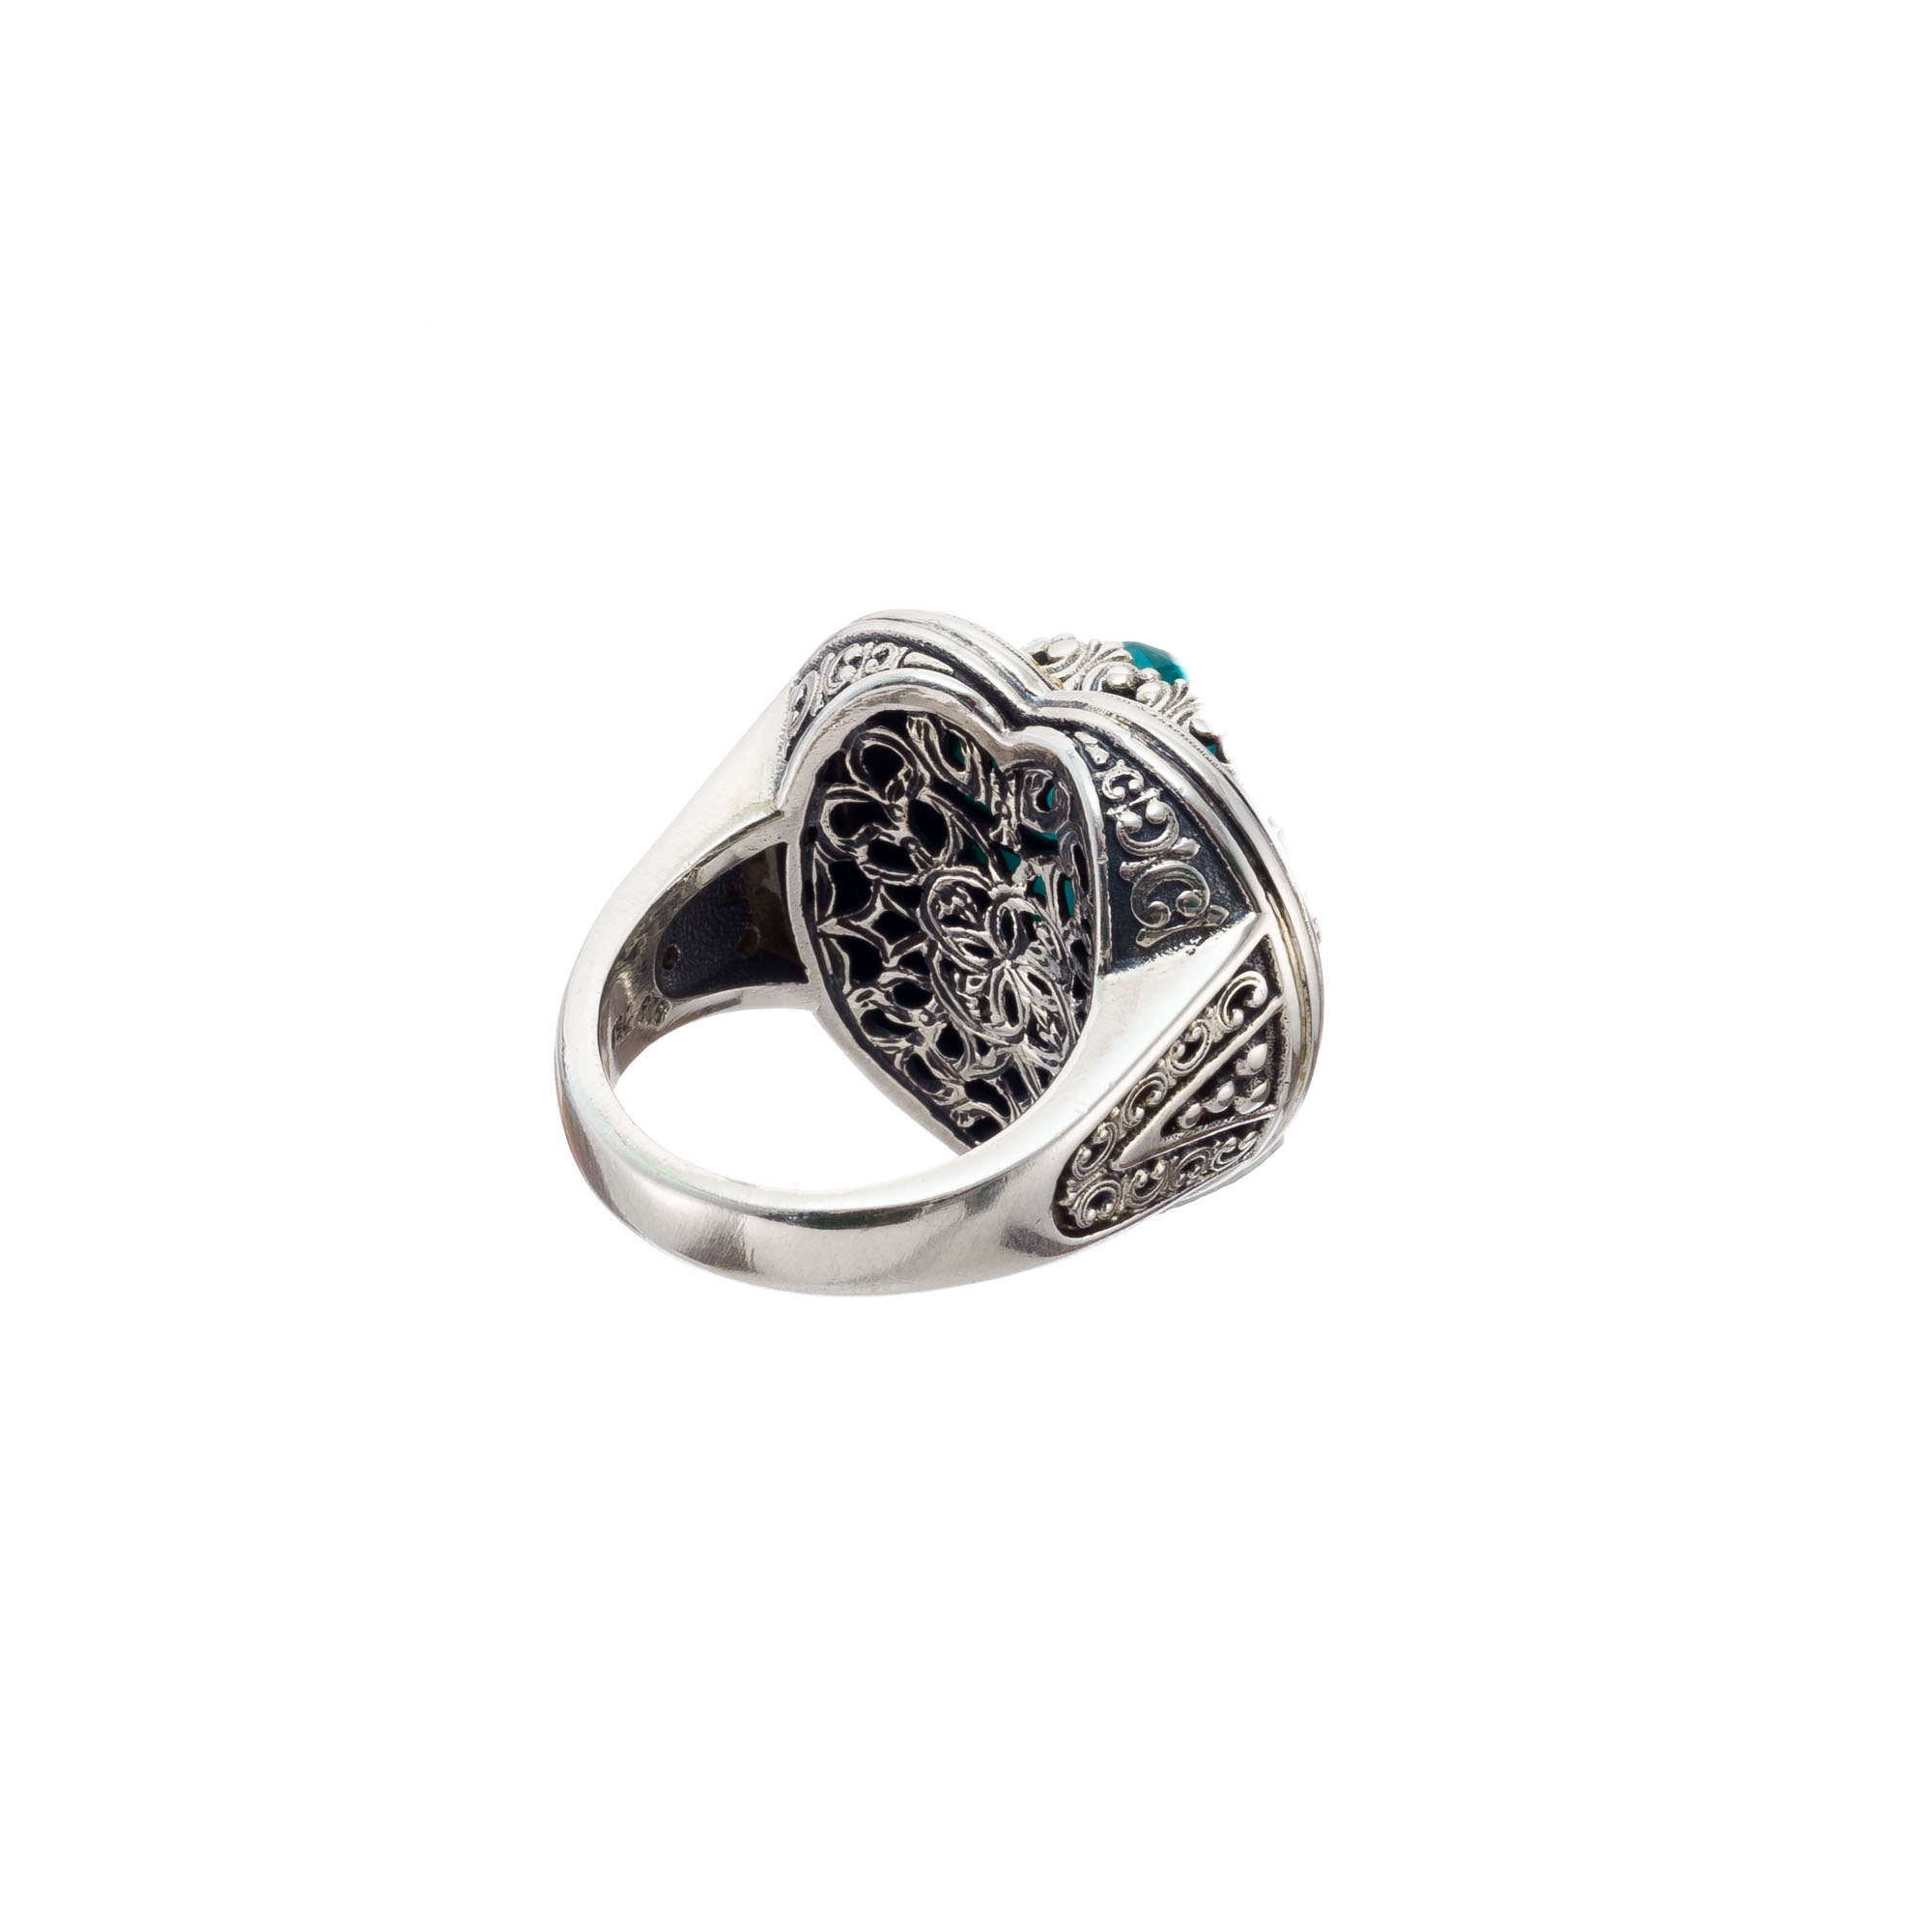 Iris Heart ring in 18K Gold and sterling silver with doublet stone